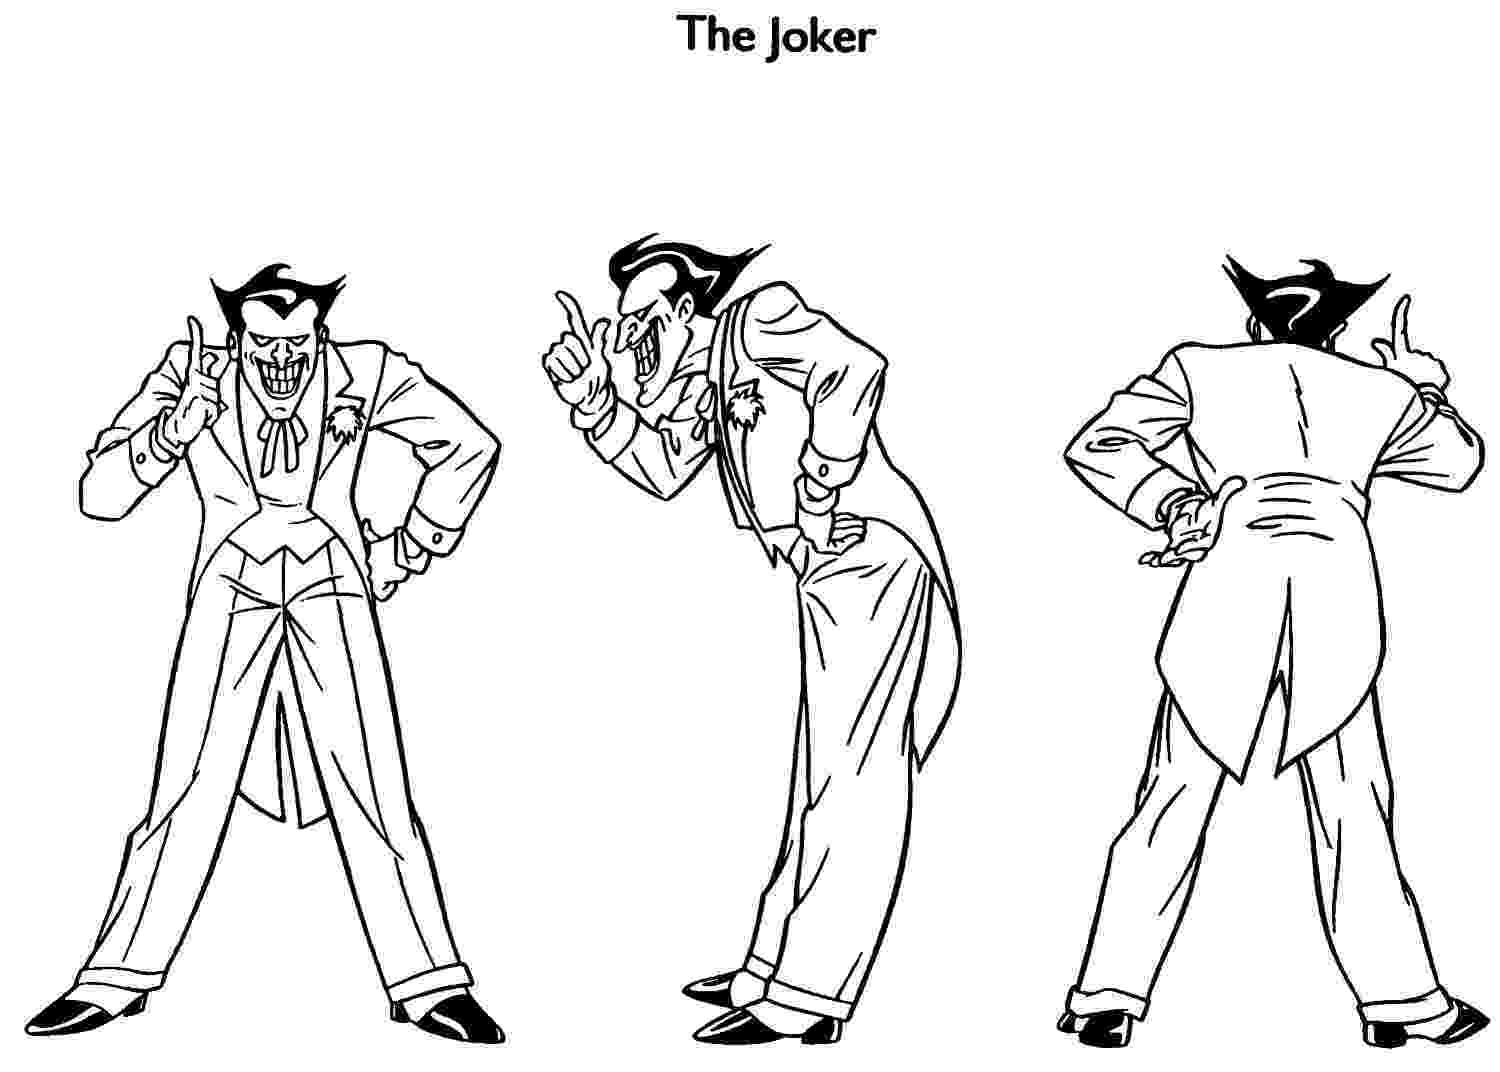 the joker coloring pages joker coloring pages best coloring pages for kids joker coloring pages the 1 1